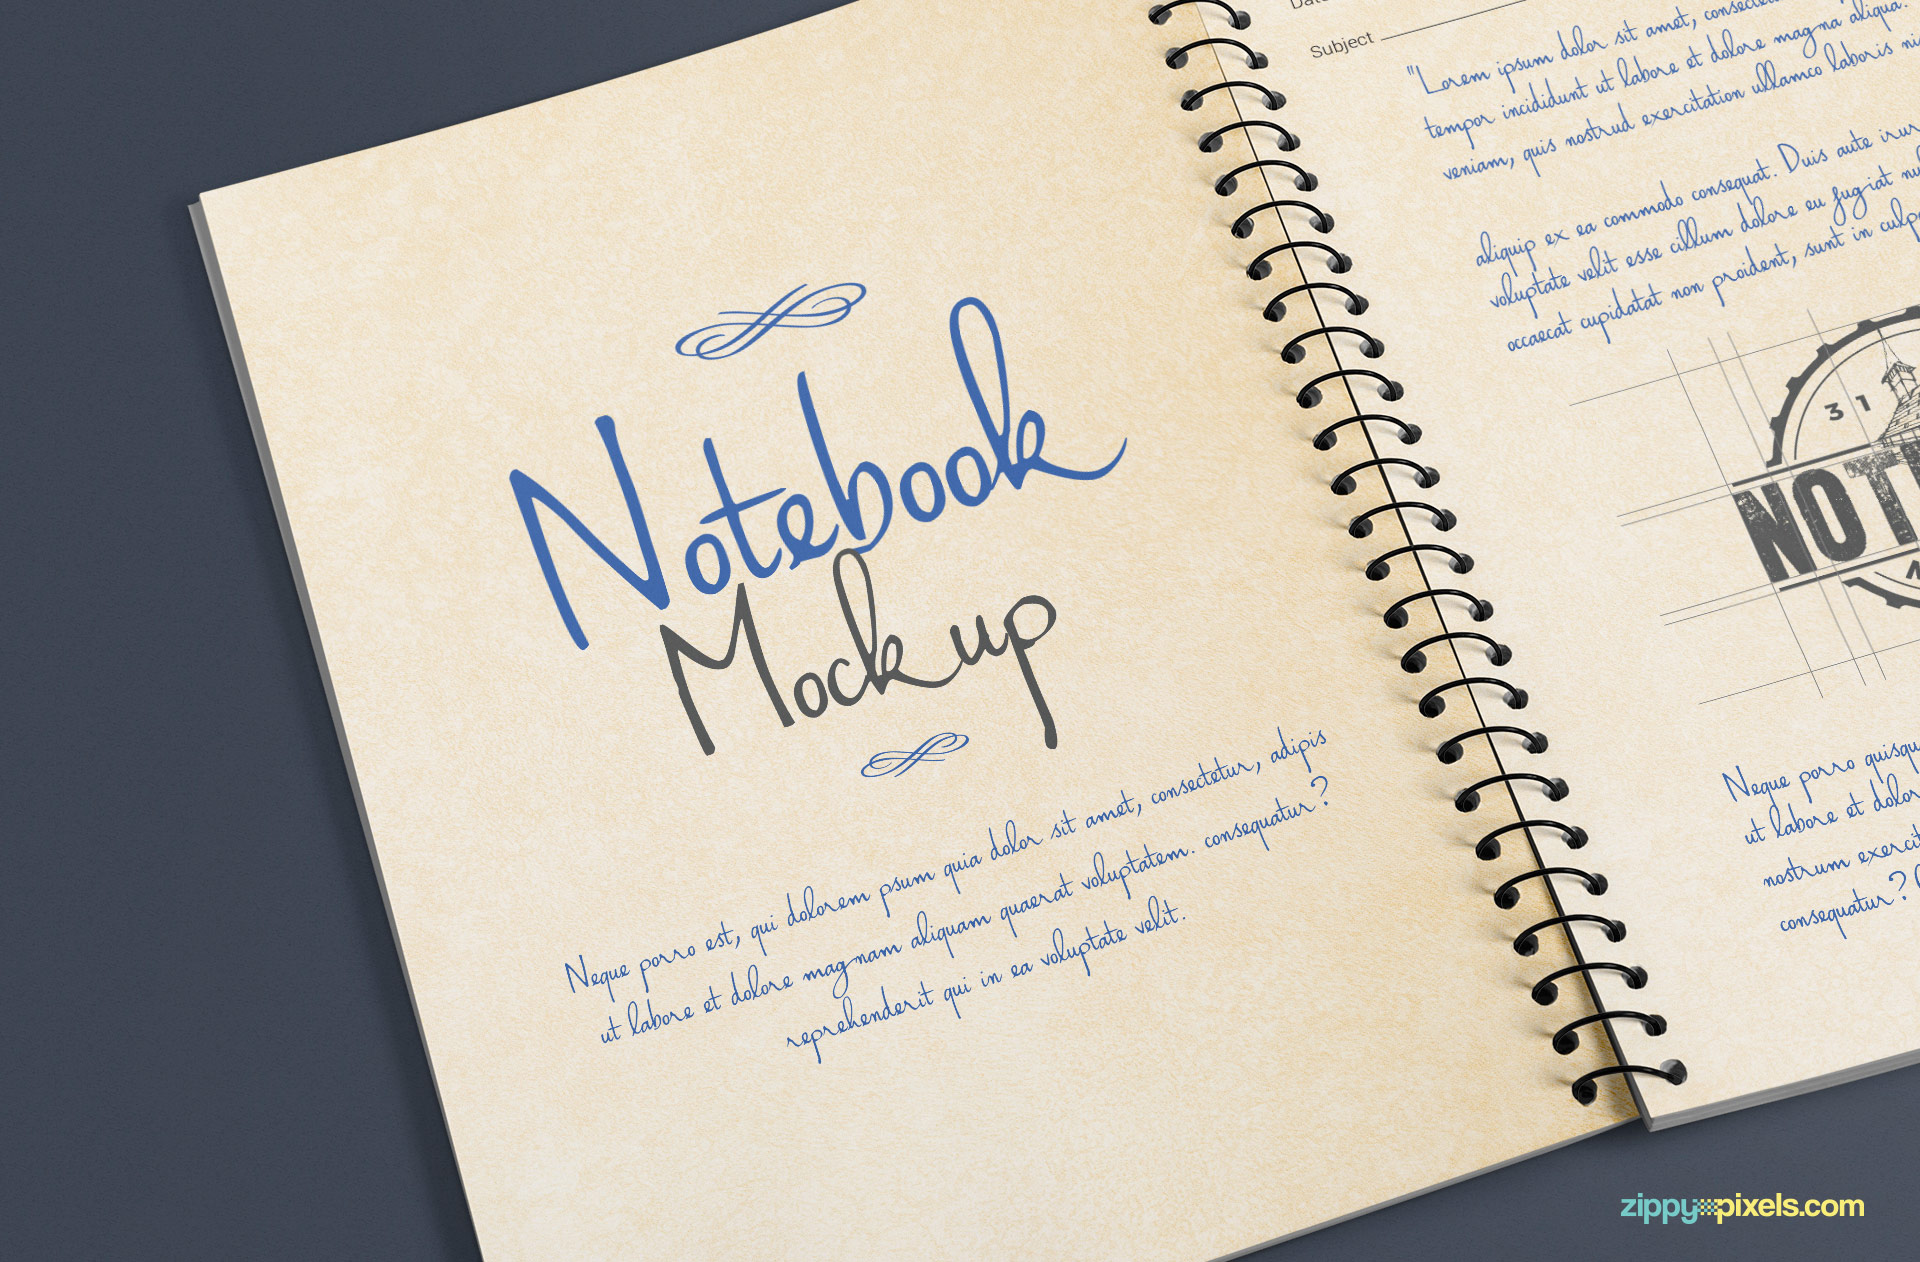 Use smart object option to place your design in this journal mockup.